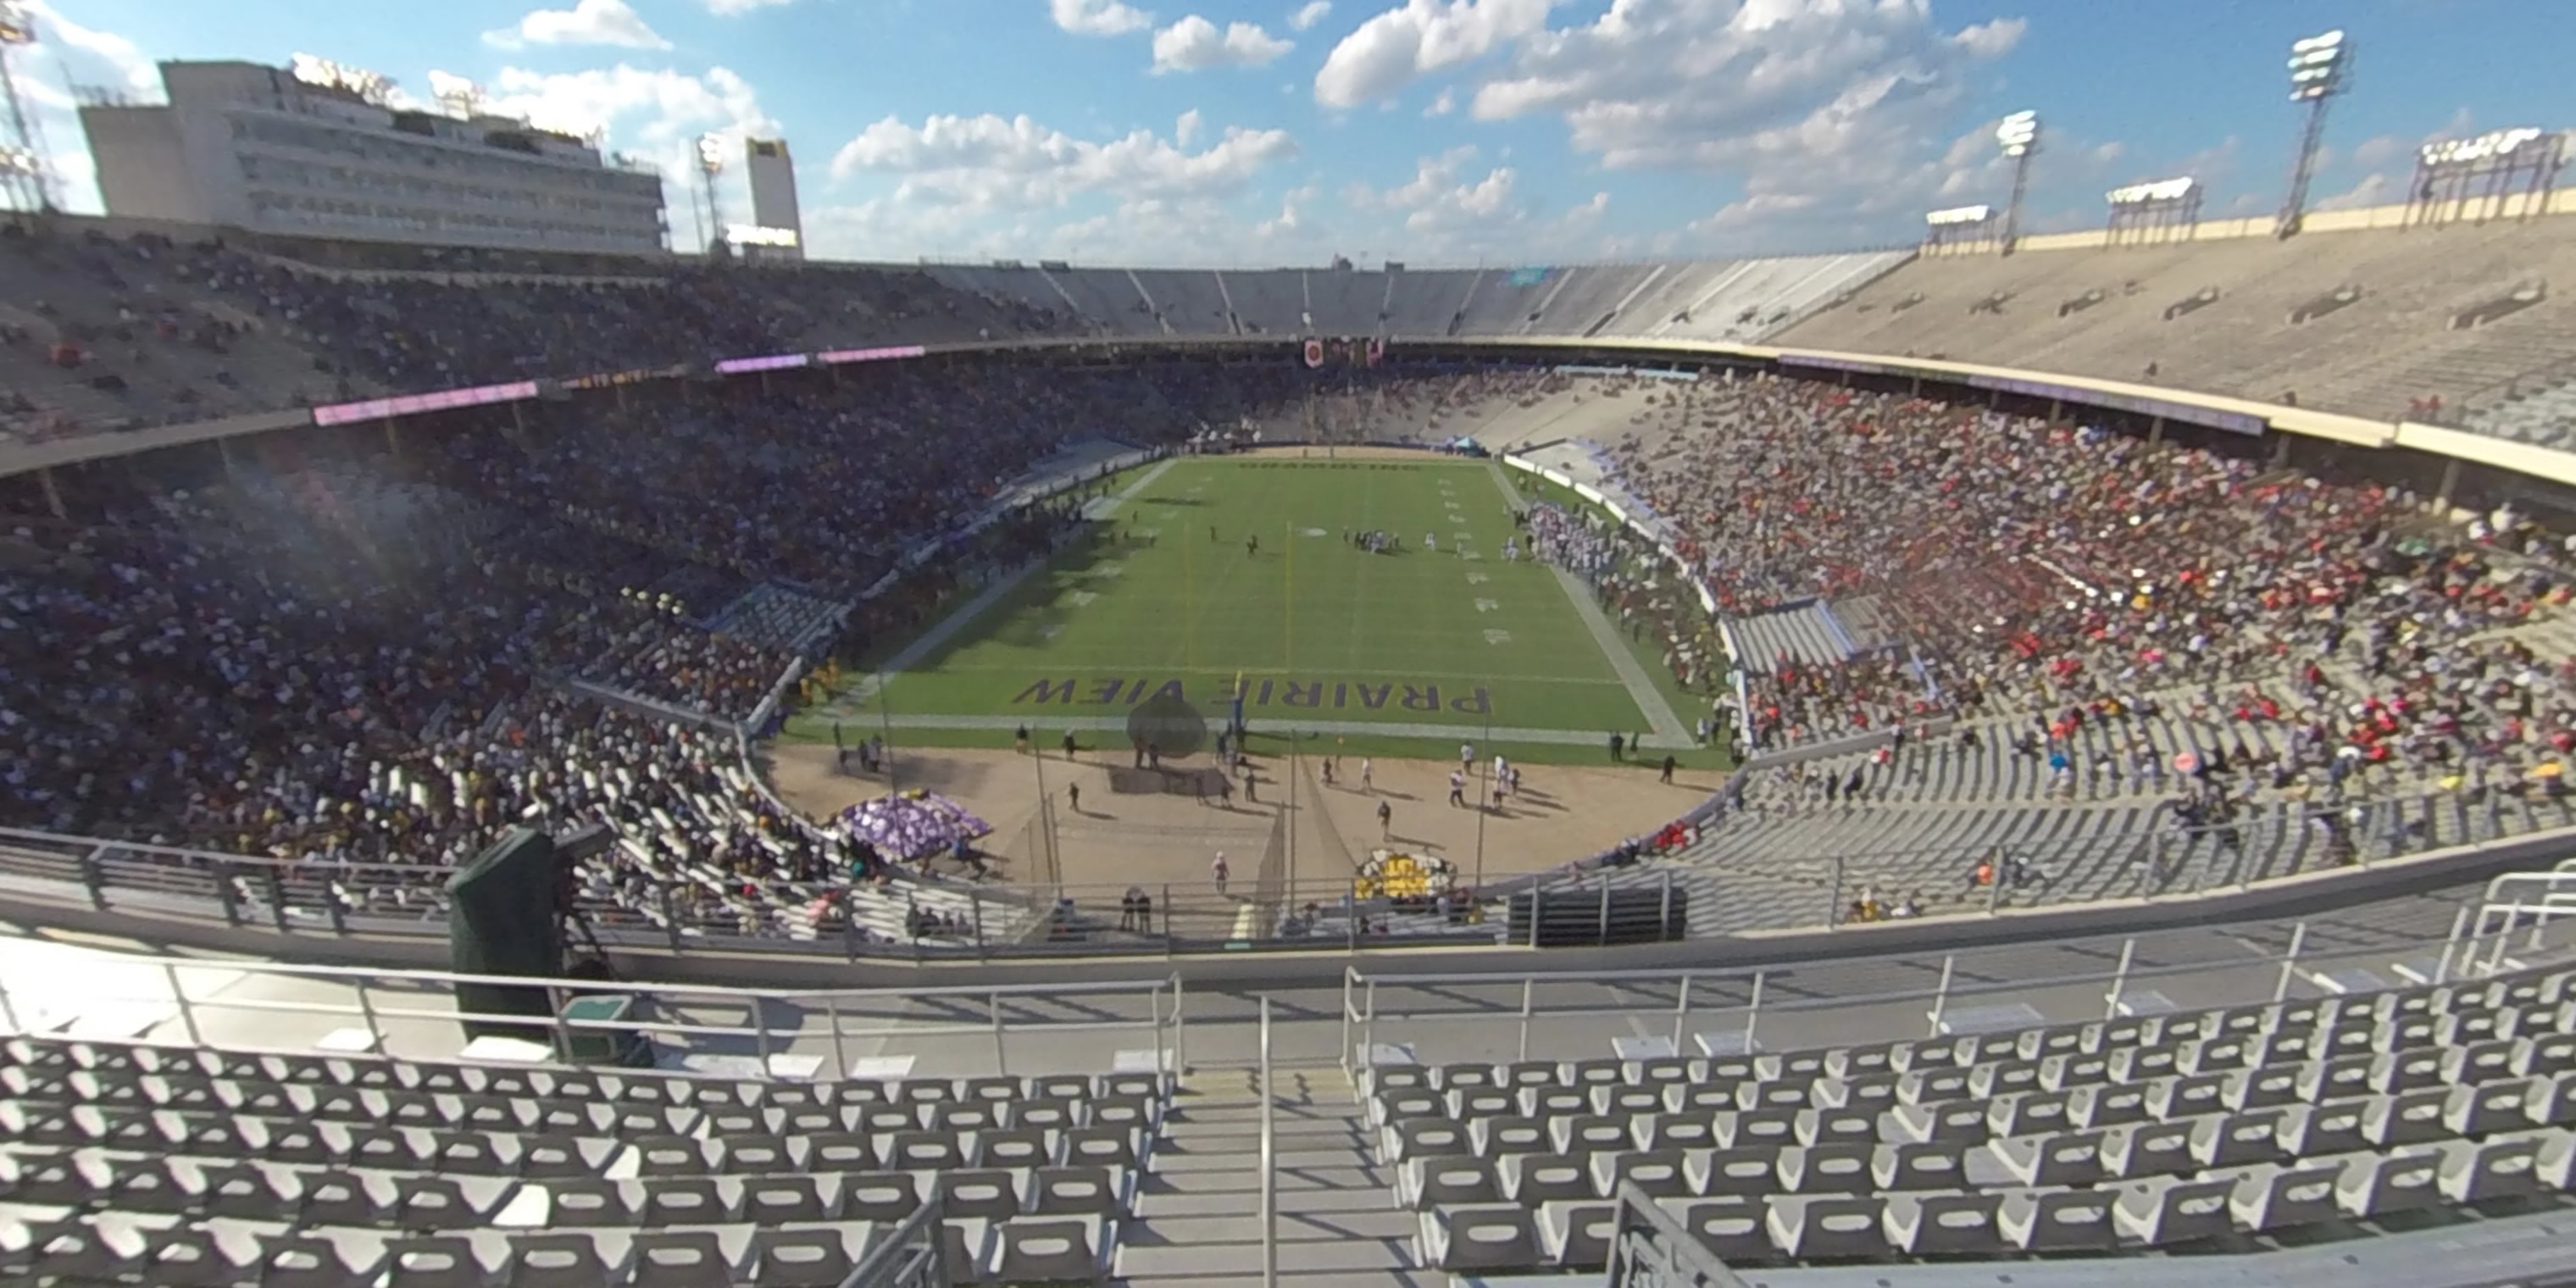 section 138 panoramic seat view  - cotton bowl